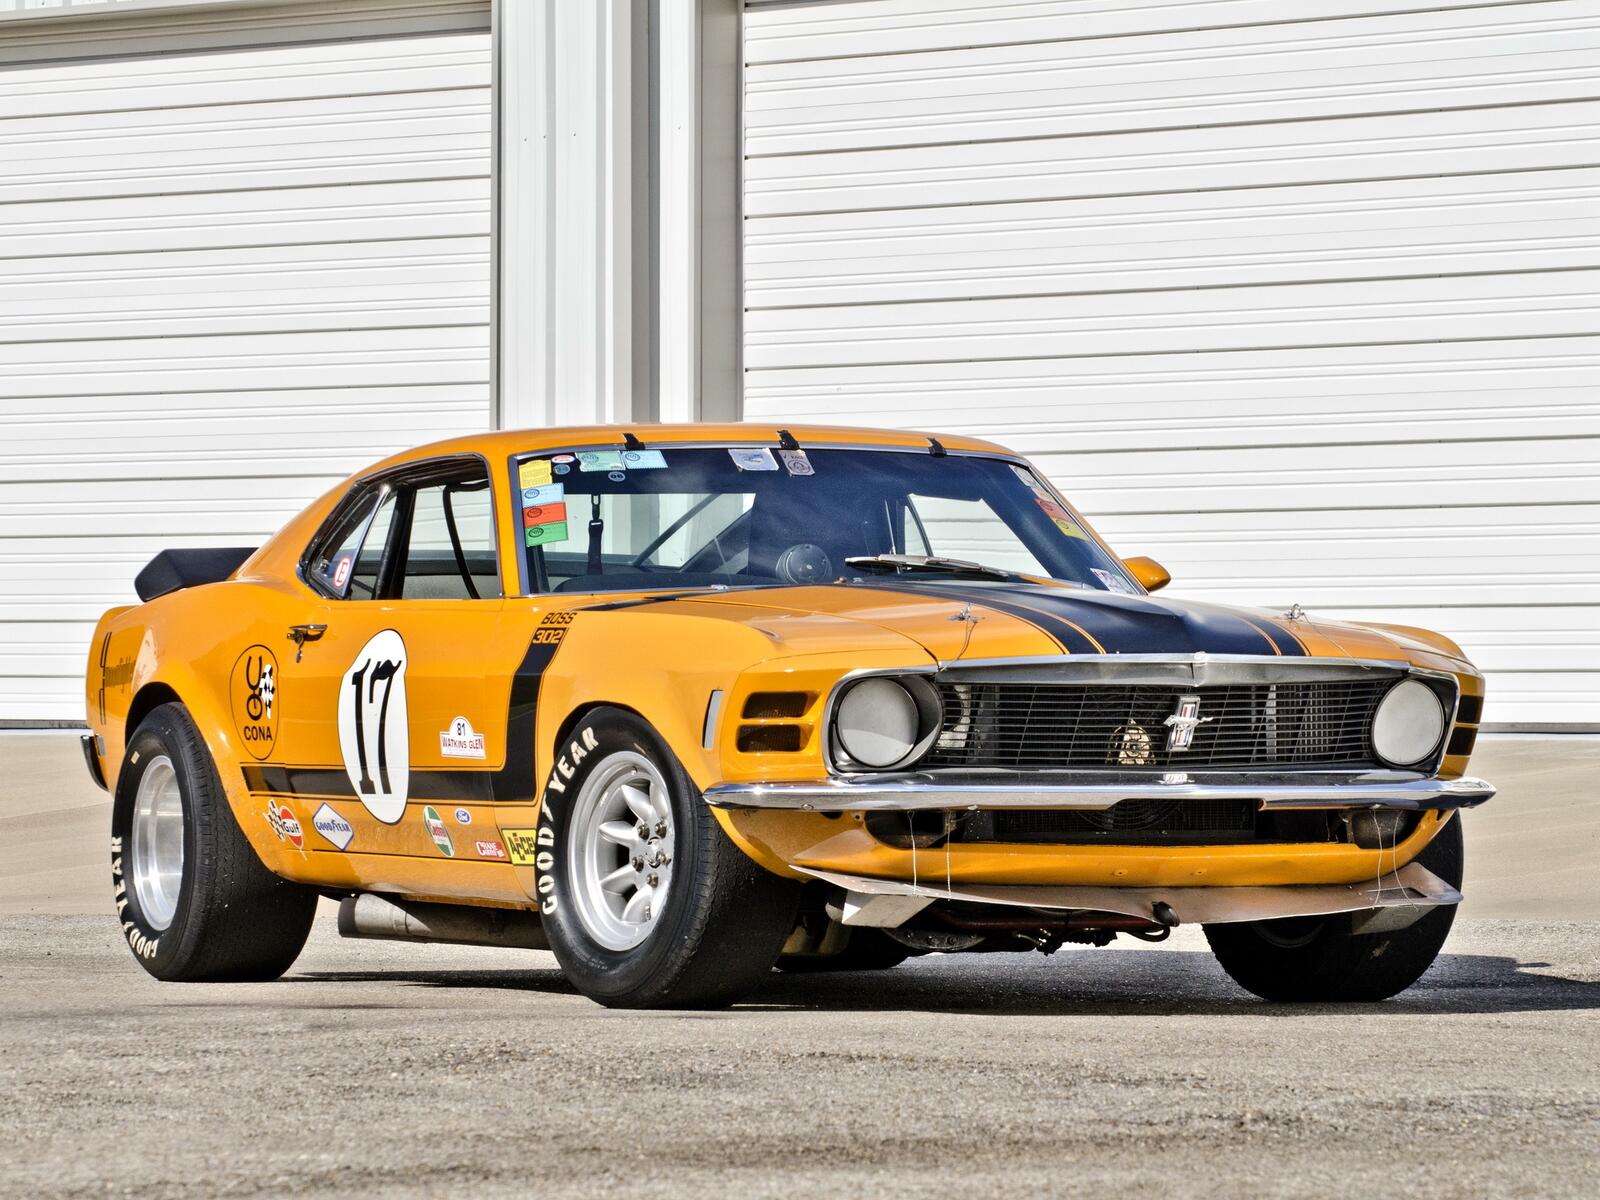 Wallpapers boss 302 mustang yellow side view on the desktop